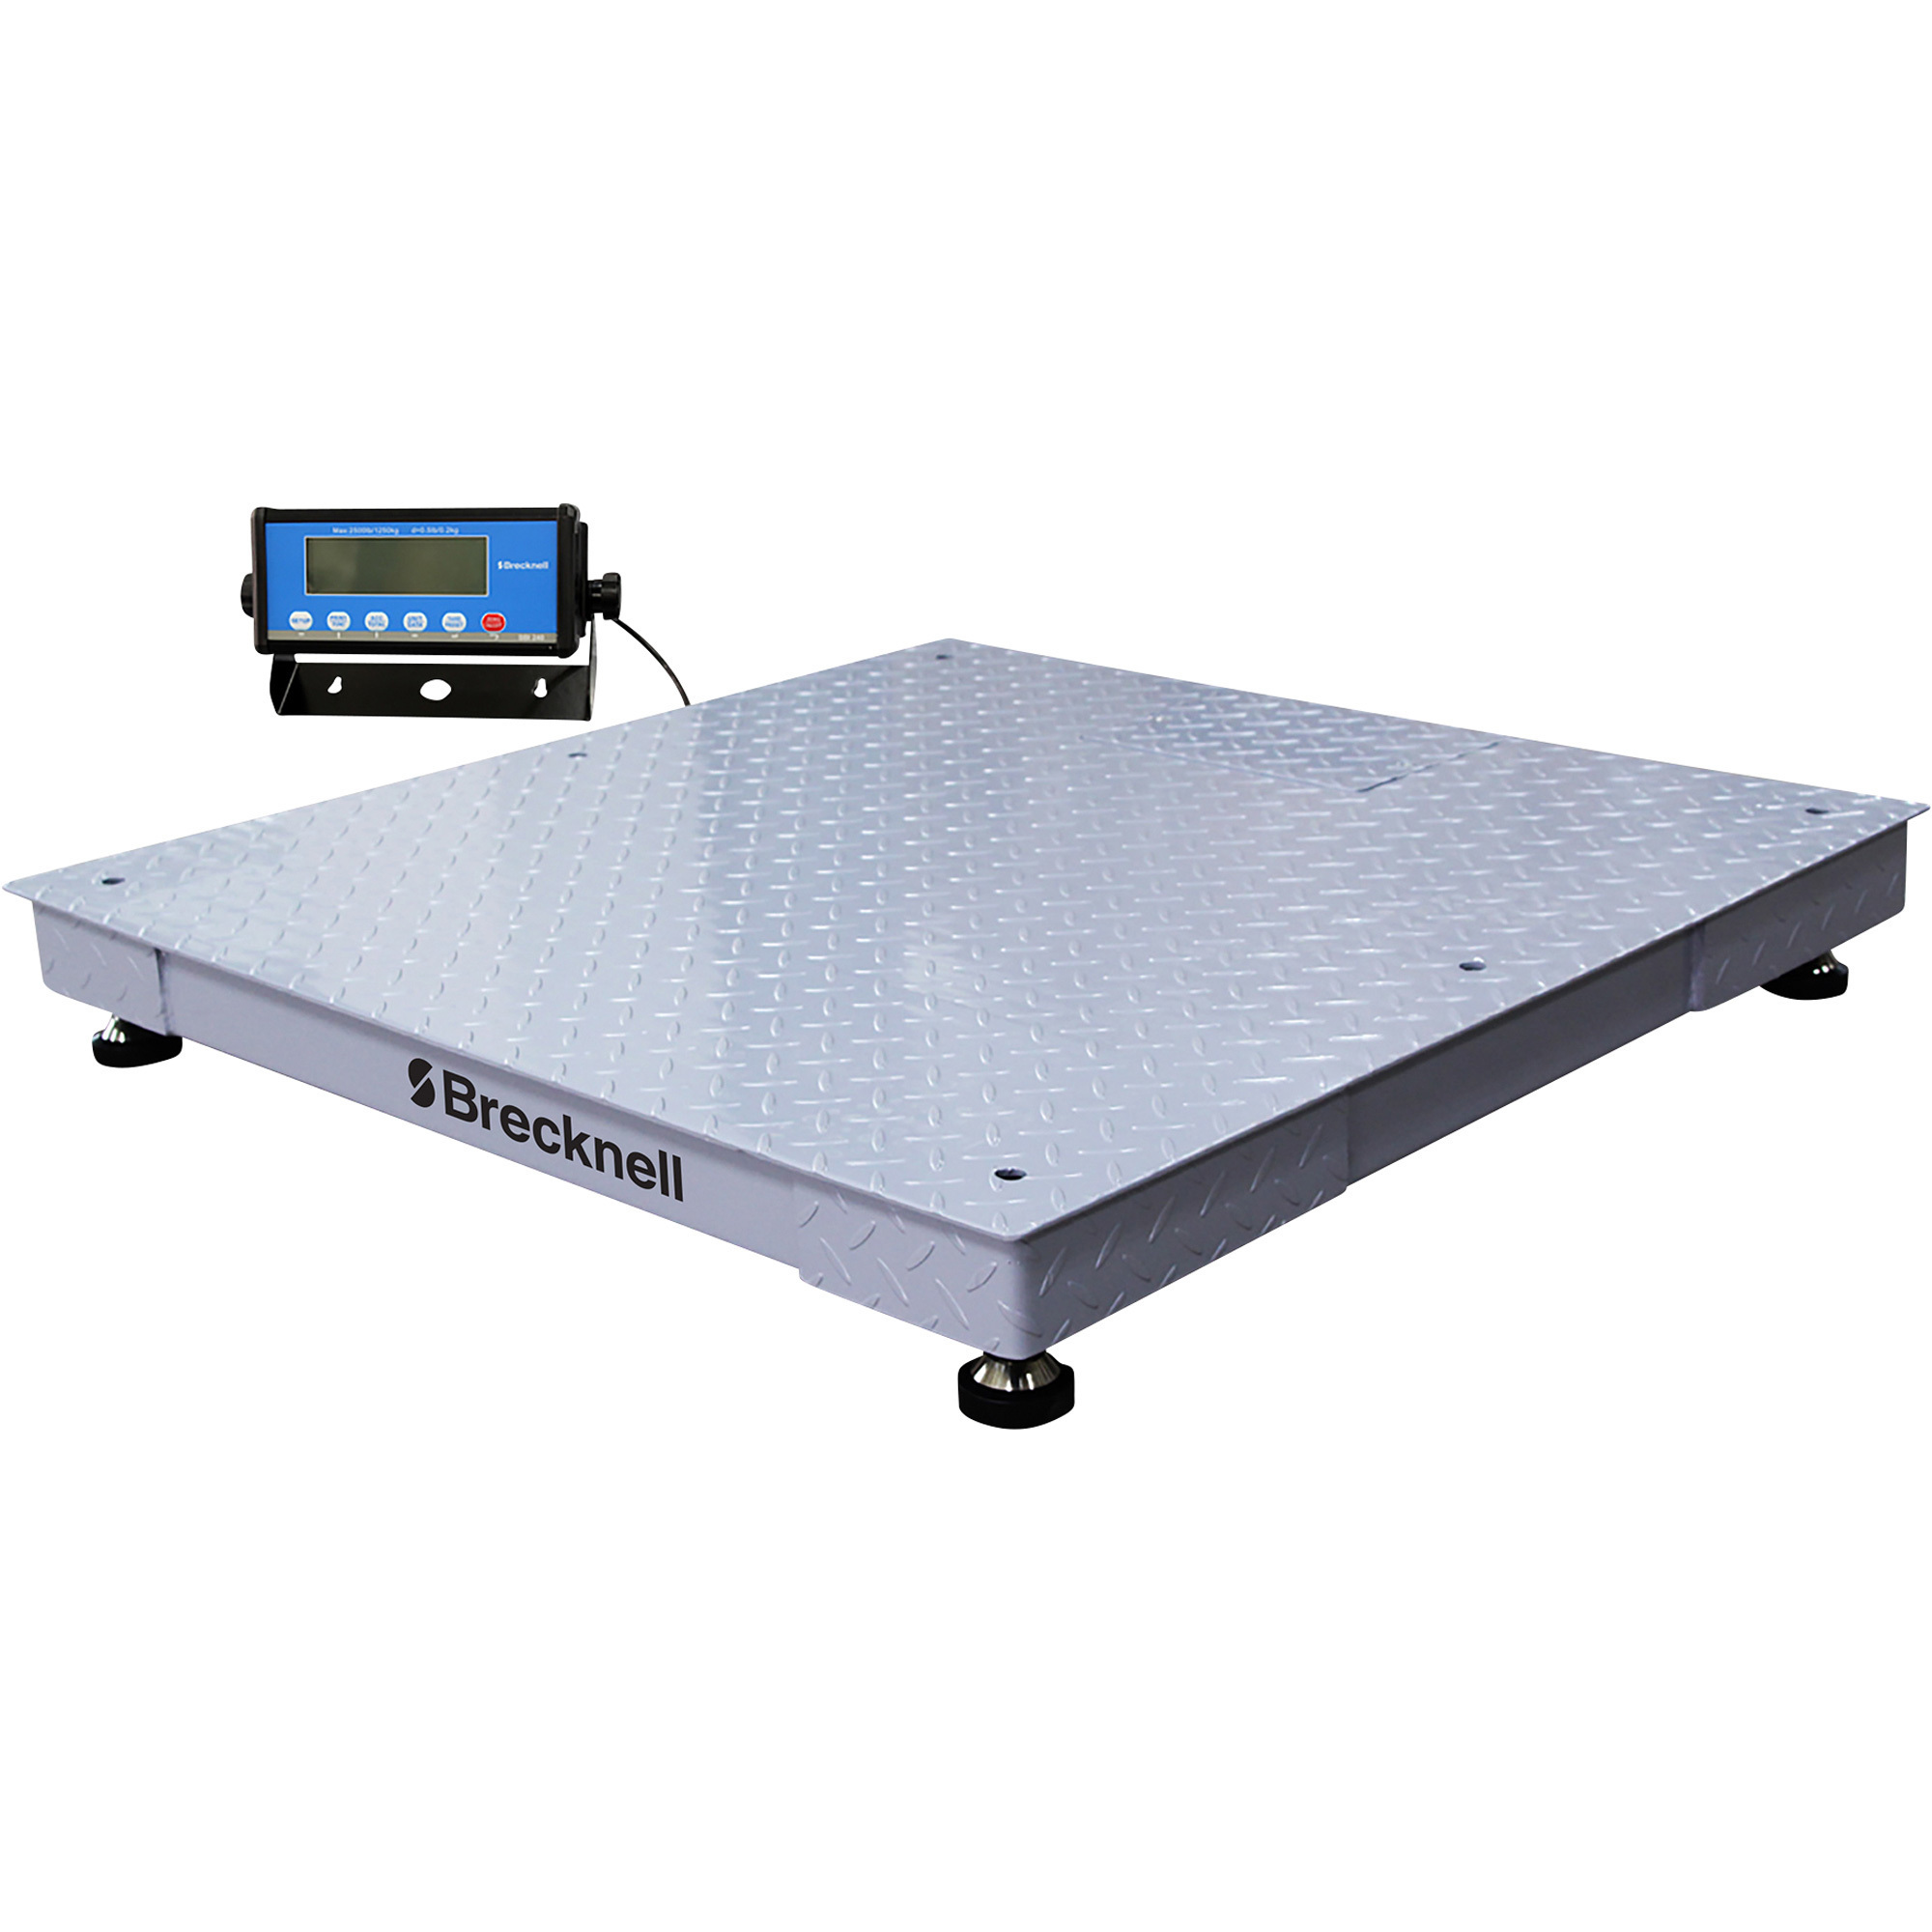 Brecknell Platform Scale with SBI240 LCD Indicator, 10,000-Lb. Capacity, 48Inch x 48Inch Deck, Model 810036380065